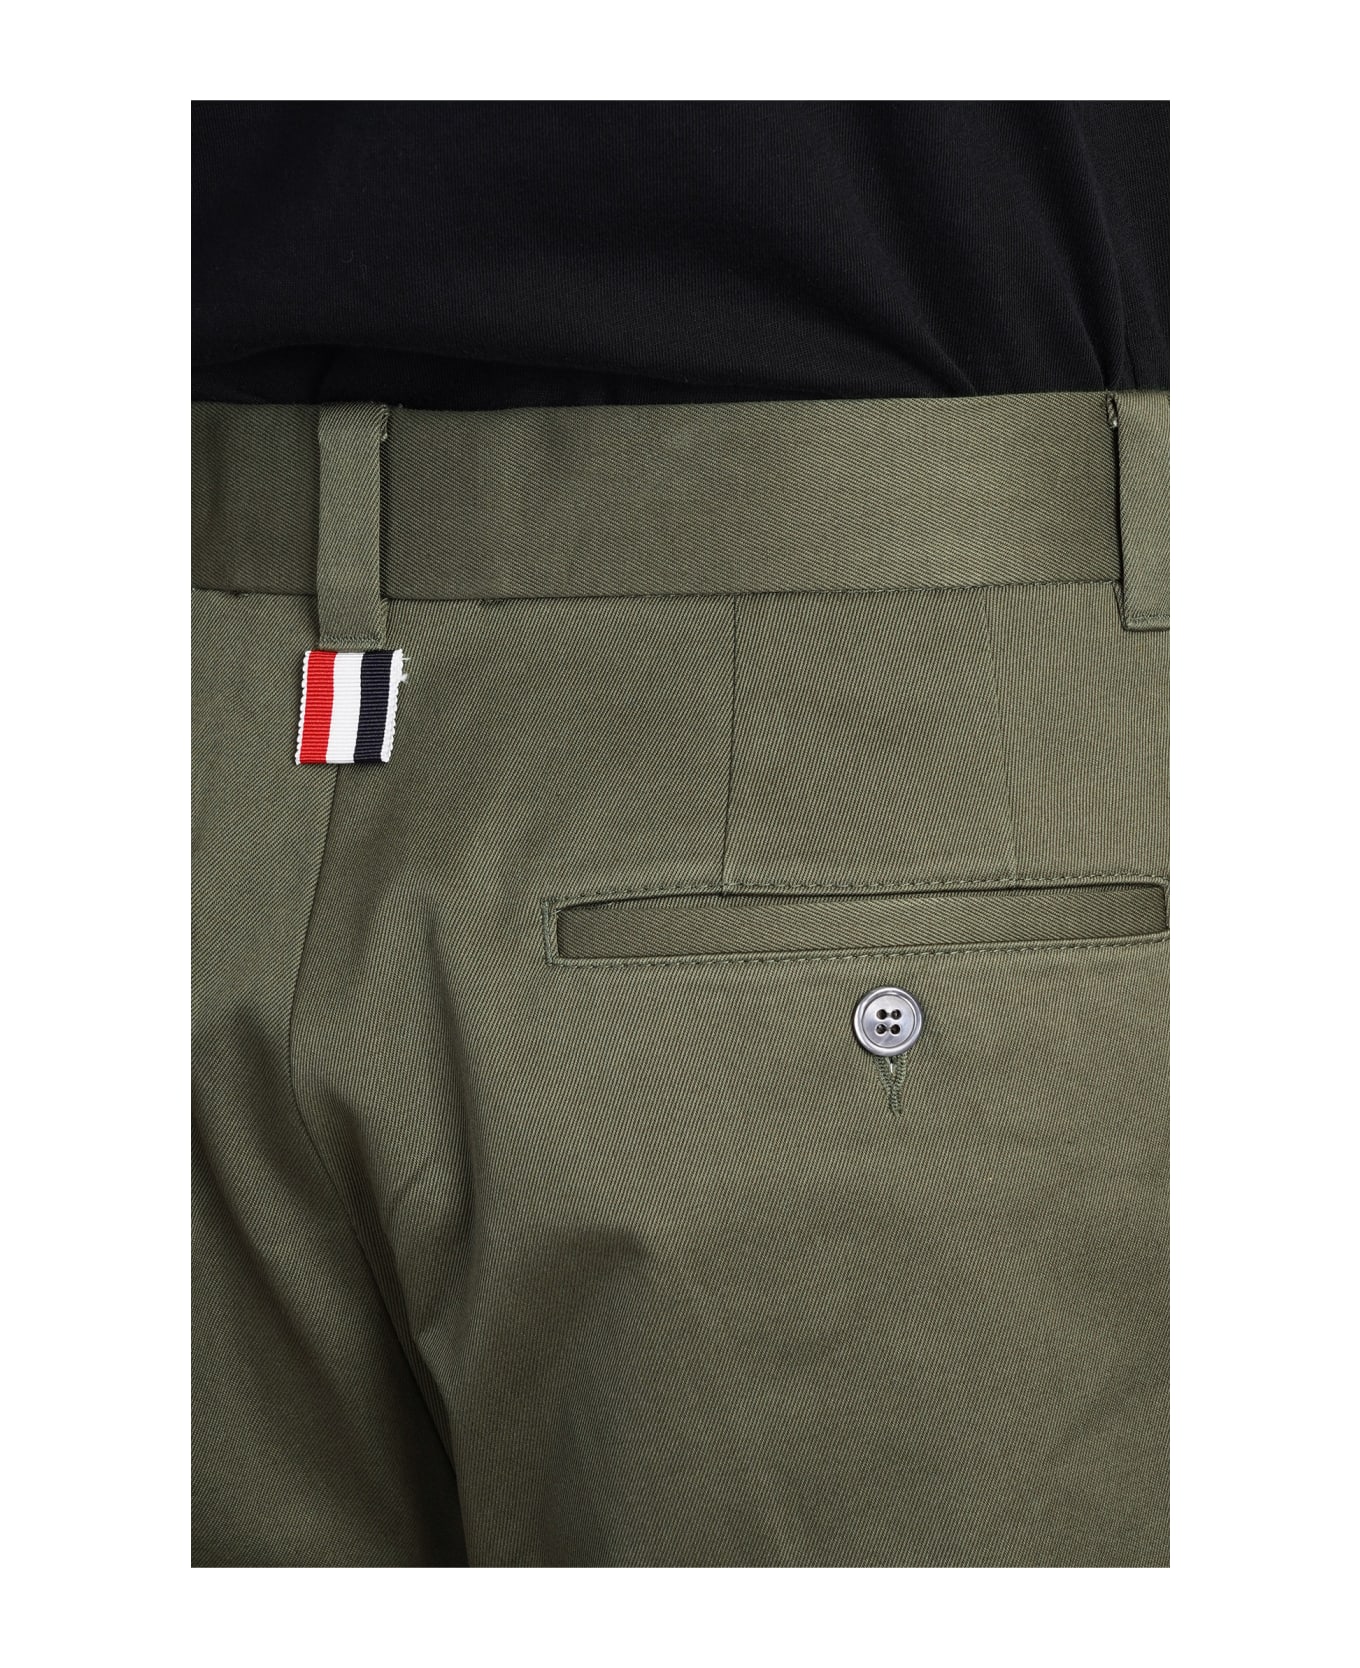 Thom Browne Pants In Green Cotton - green